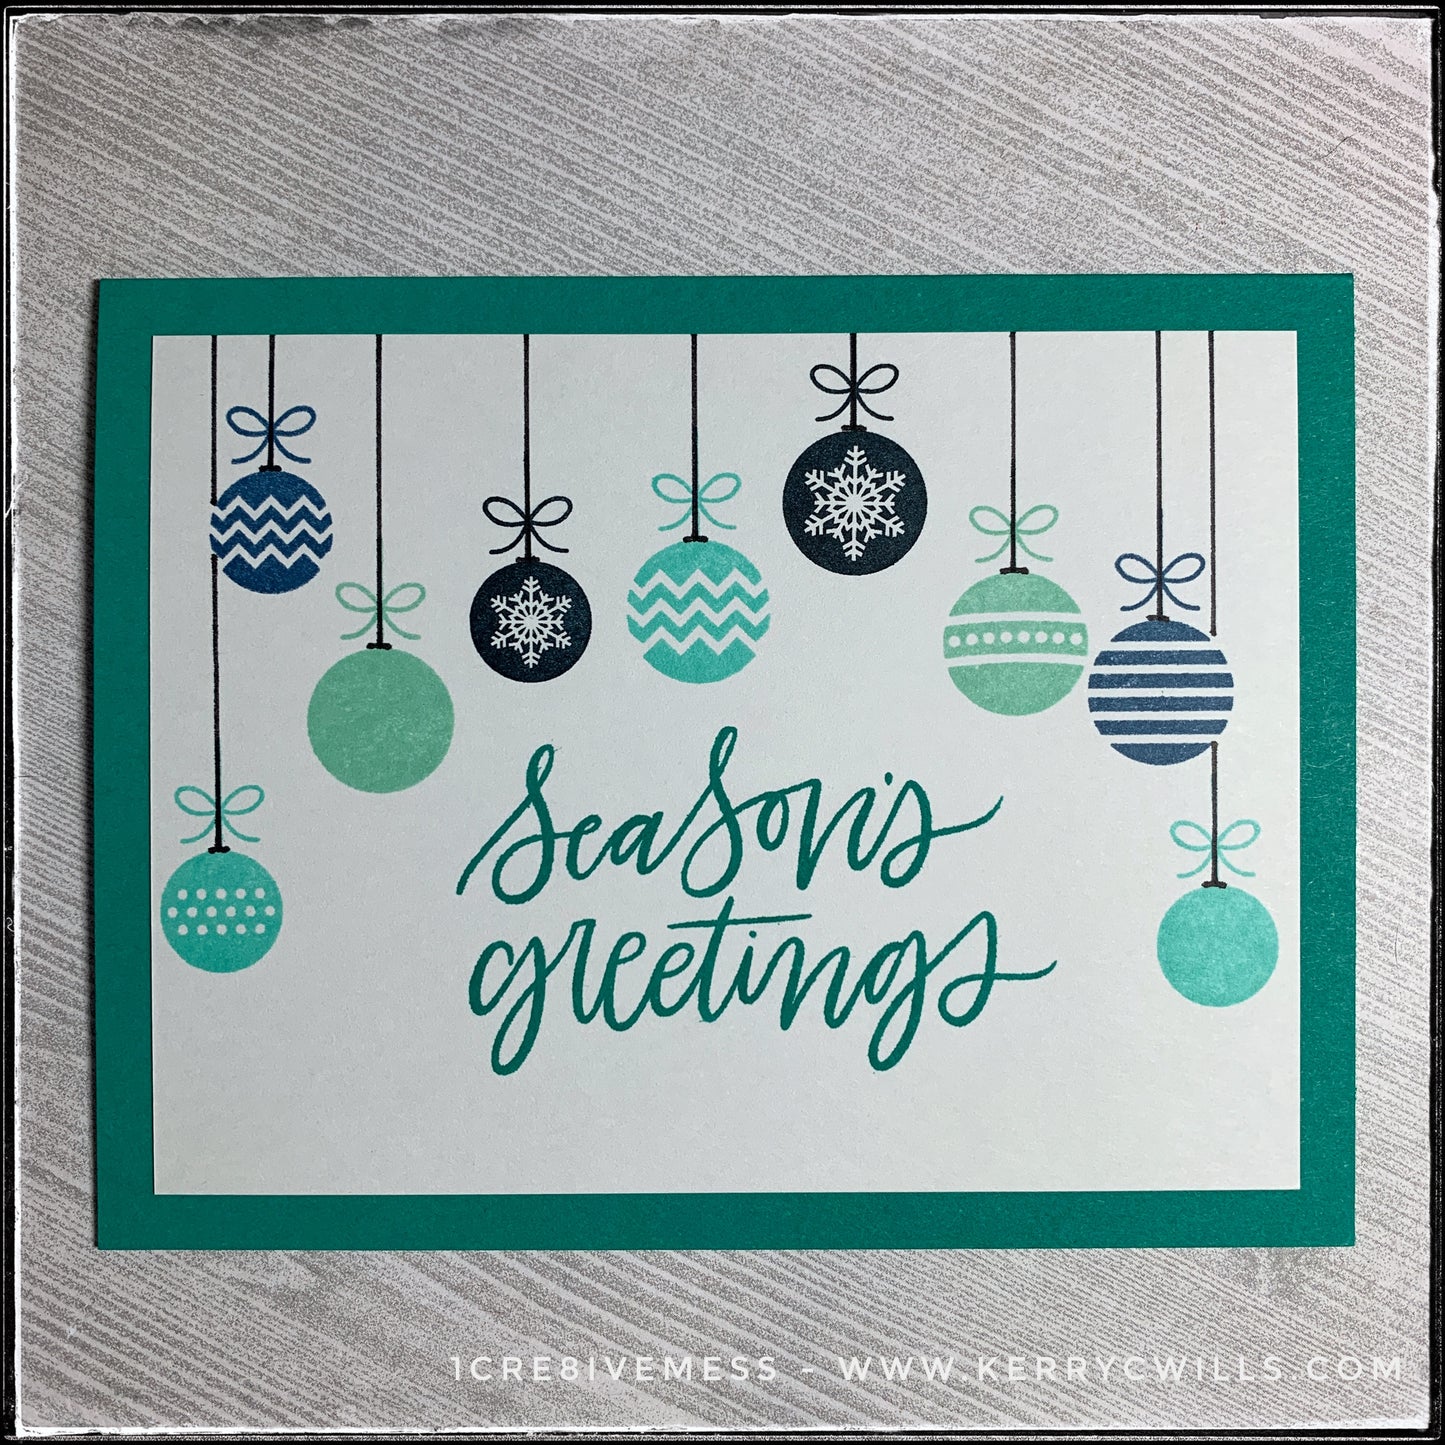 A classic flat-lay of this handmade holiday card, the sentiment "season's greetings" is stamped in the center of the card front. The color coordinates with the color of the card base. A series of nine hanging ornaments graces the top portion of the card, cascading along the top. Shades of aquas, turquoises and deep blues evoke a wintery feeling. 